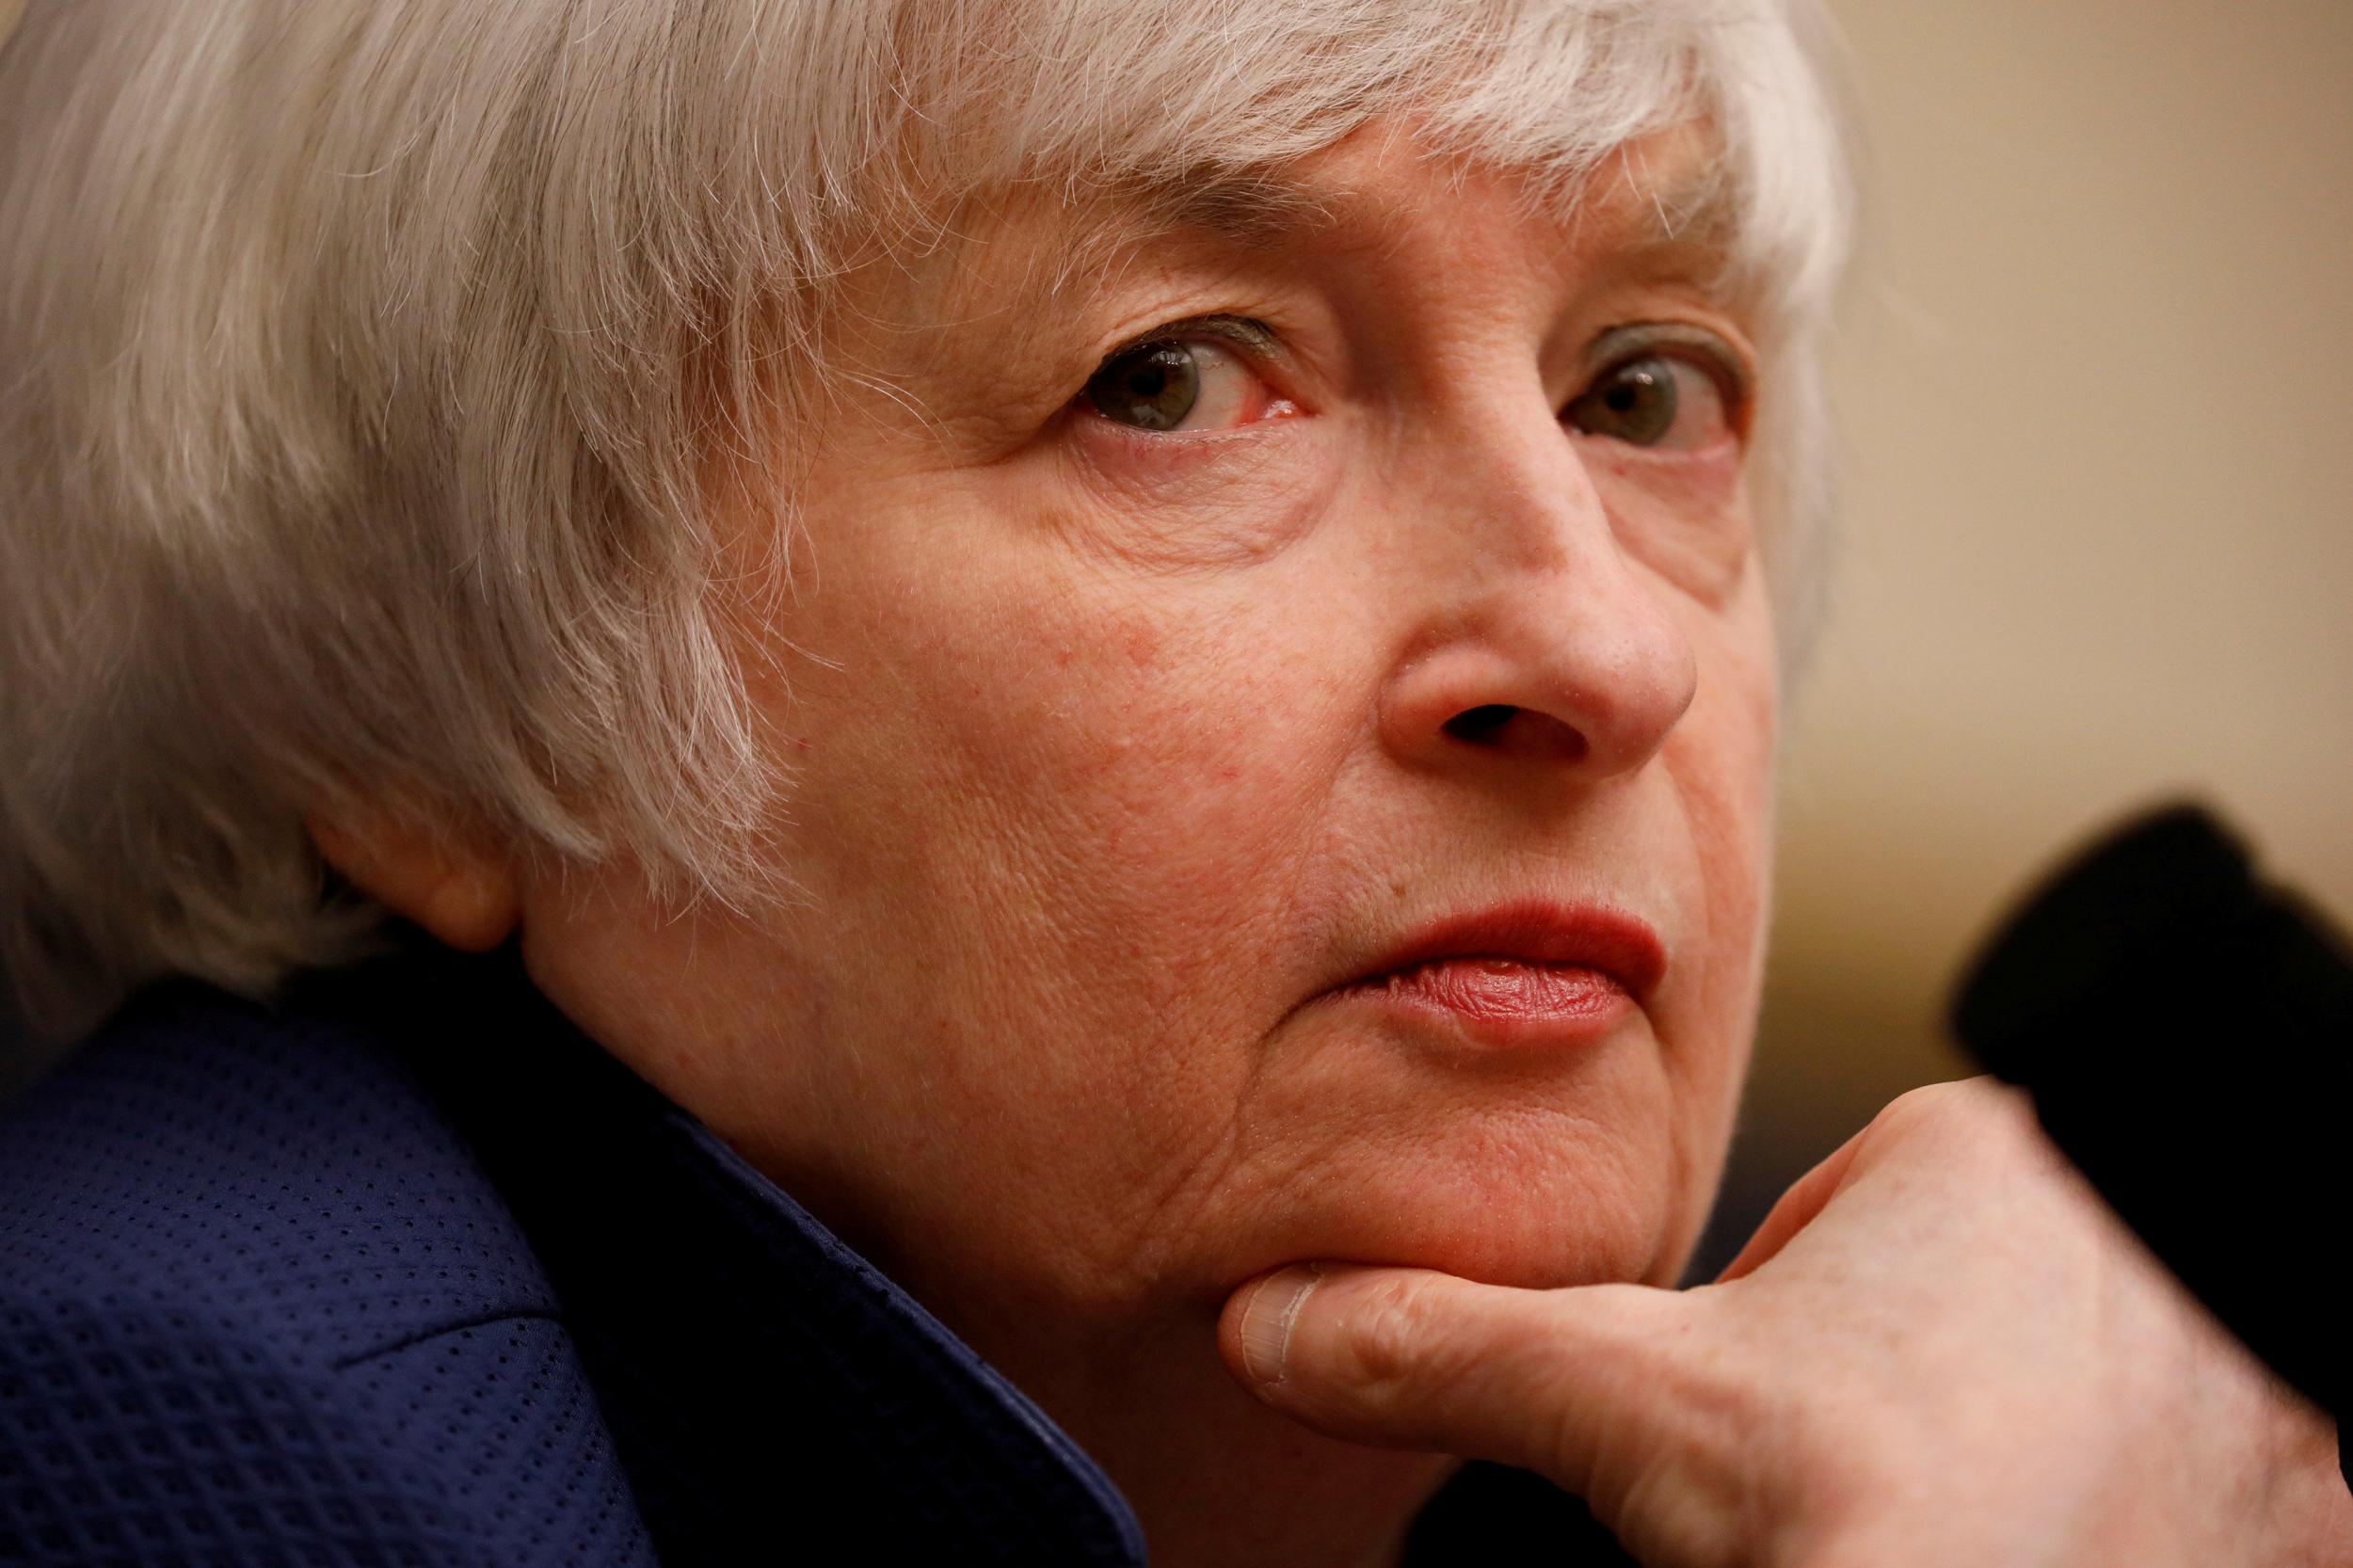 The assumption of many is that Trump simply could not bring himself to reappoint Yellen, who had been installed by his bête noire, Barack Obama